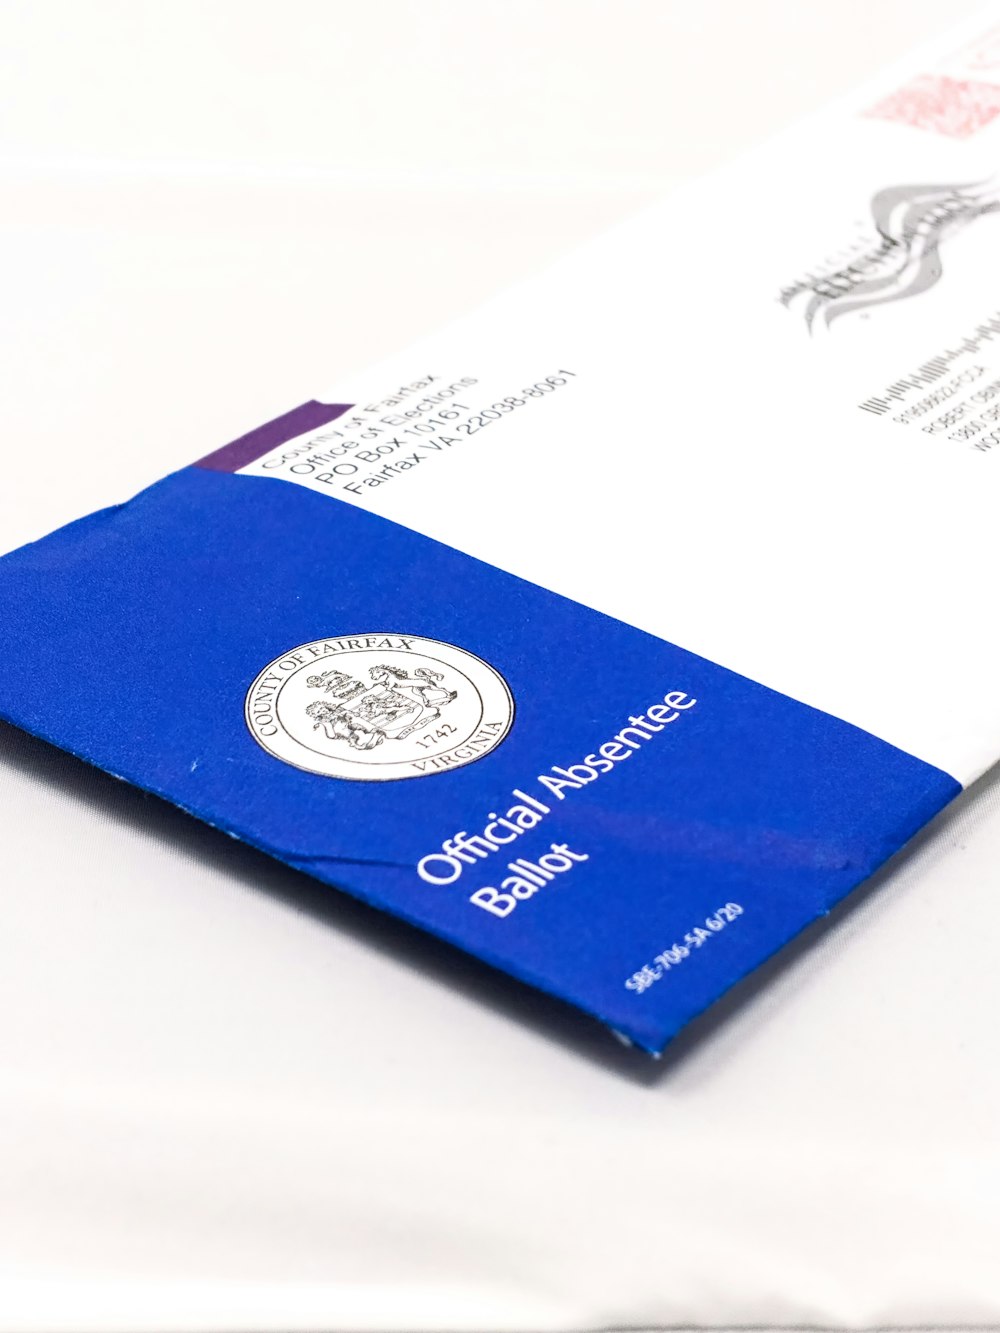 blue book on white surface